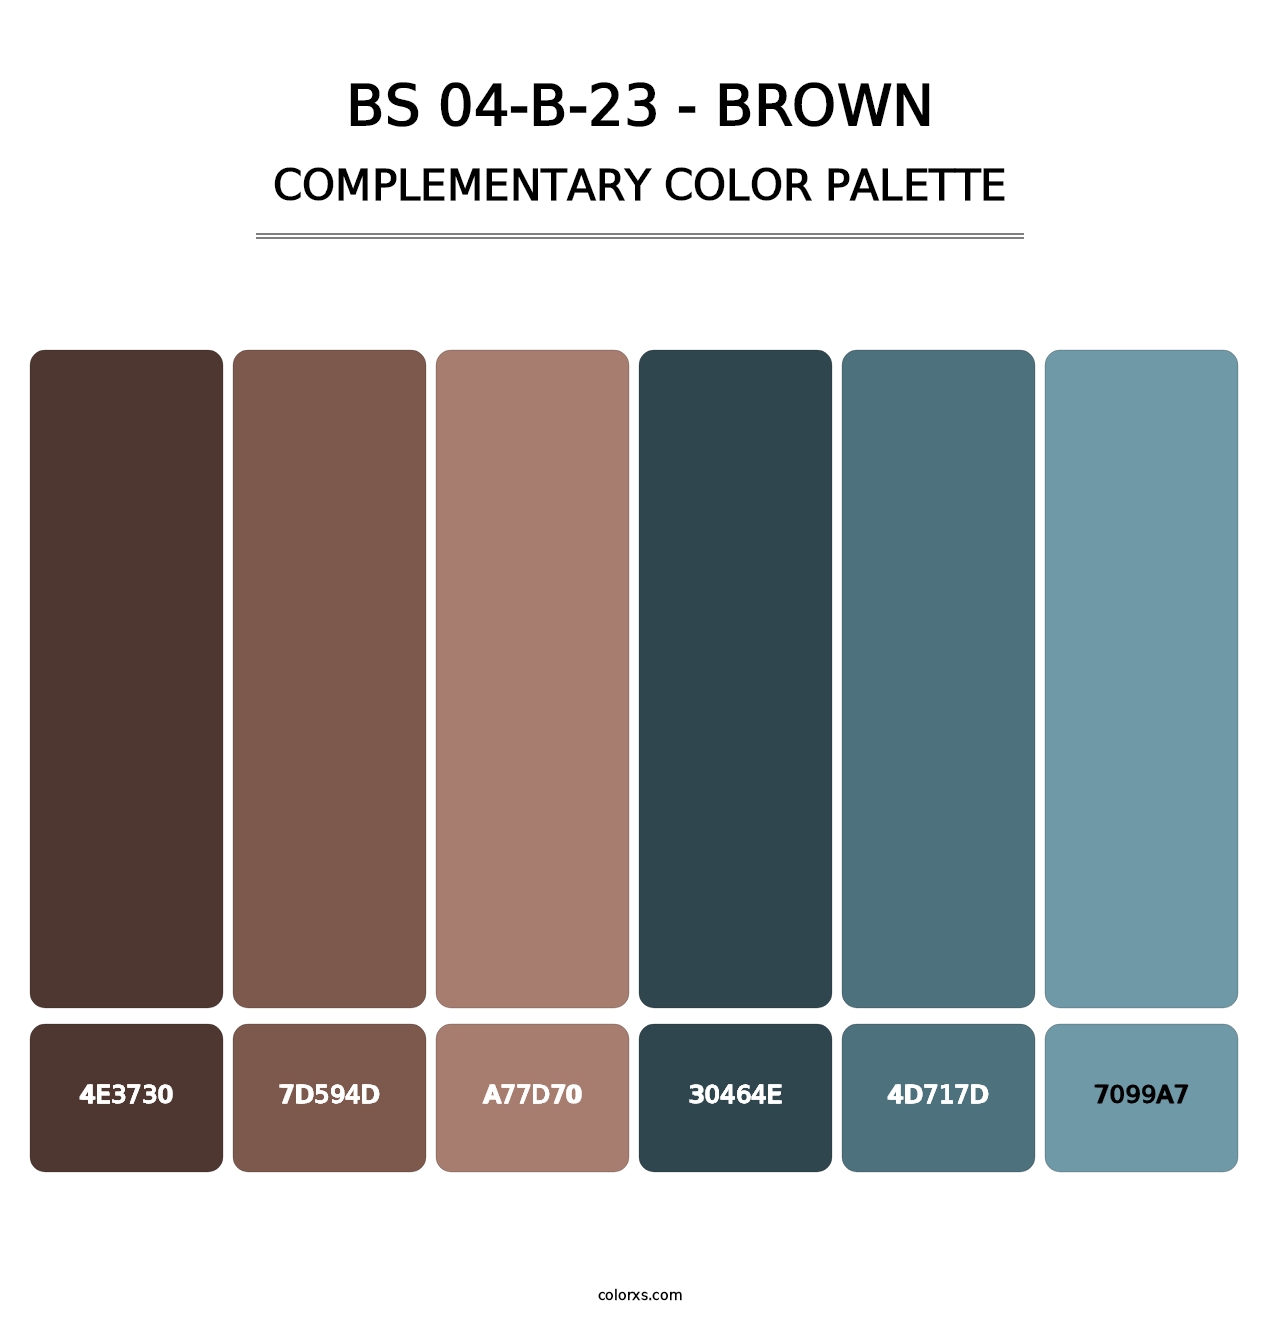 BS 04-B-23 - Brown - Complementary Color Palette